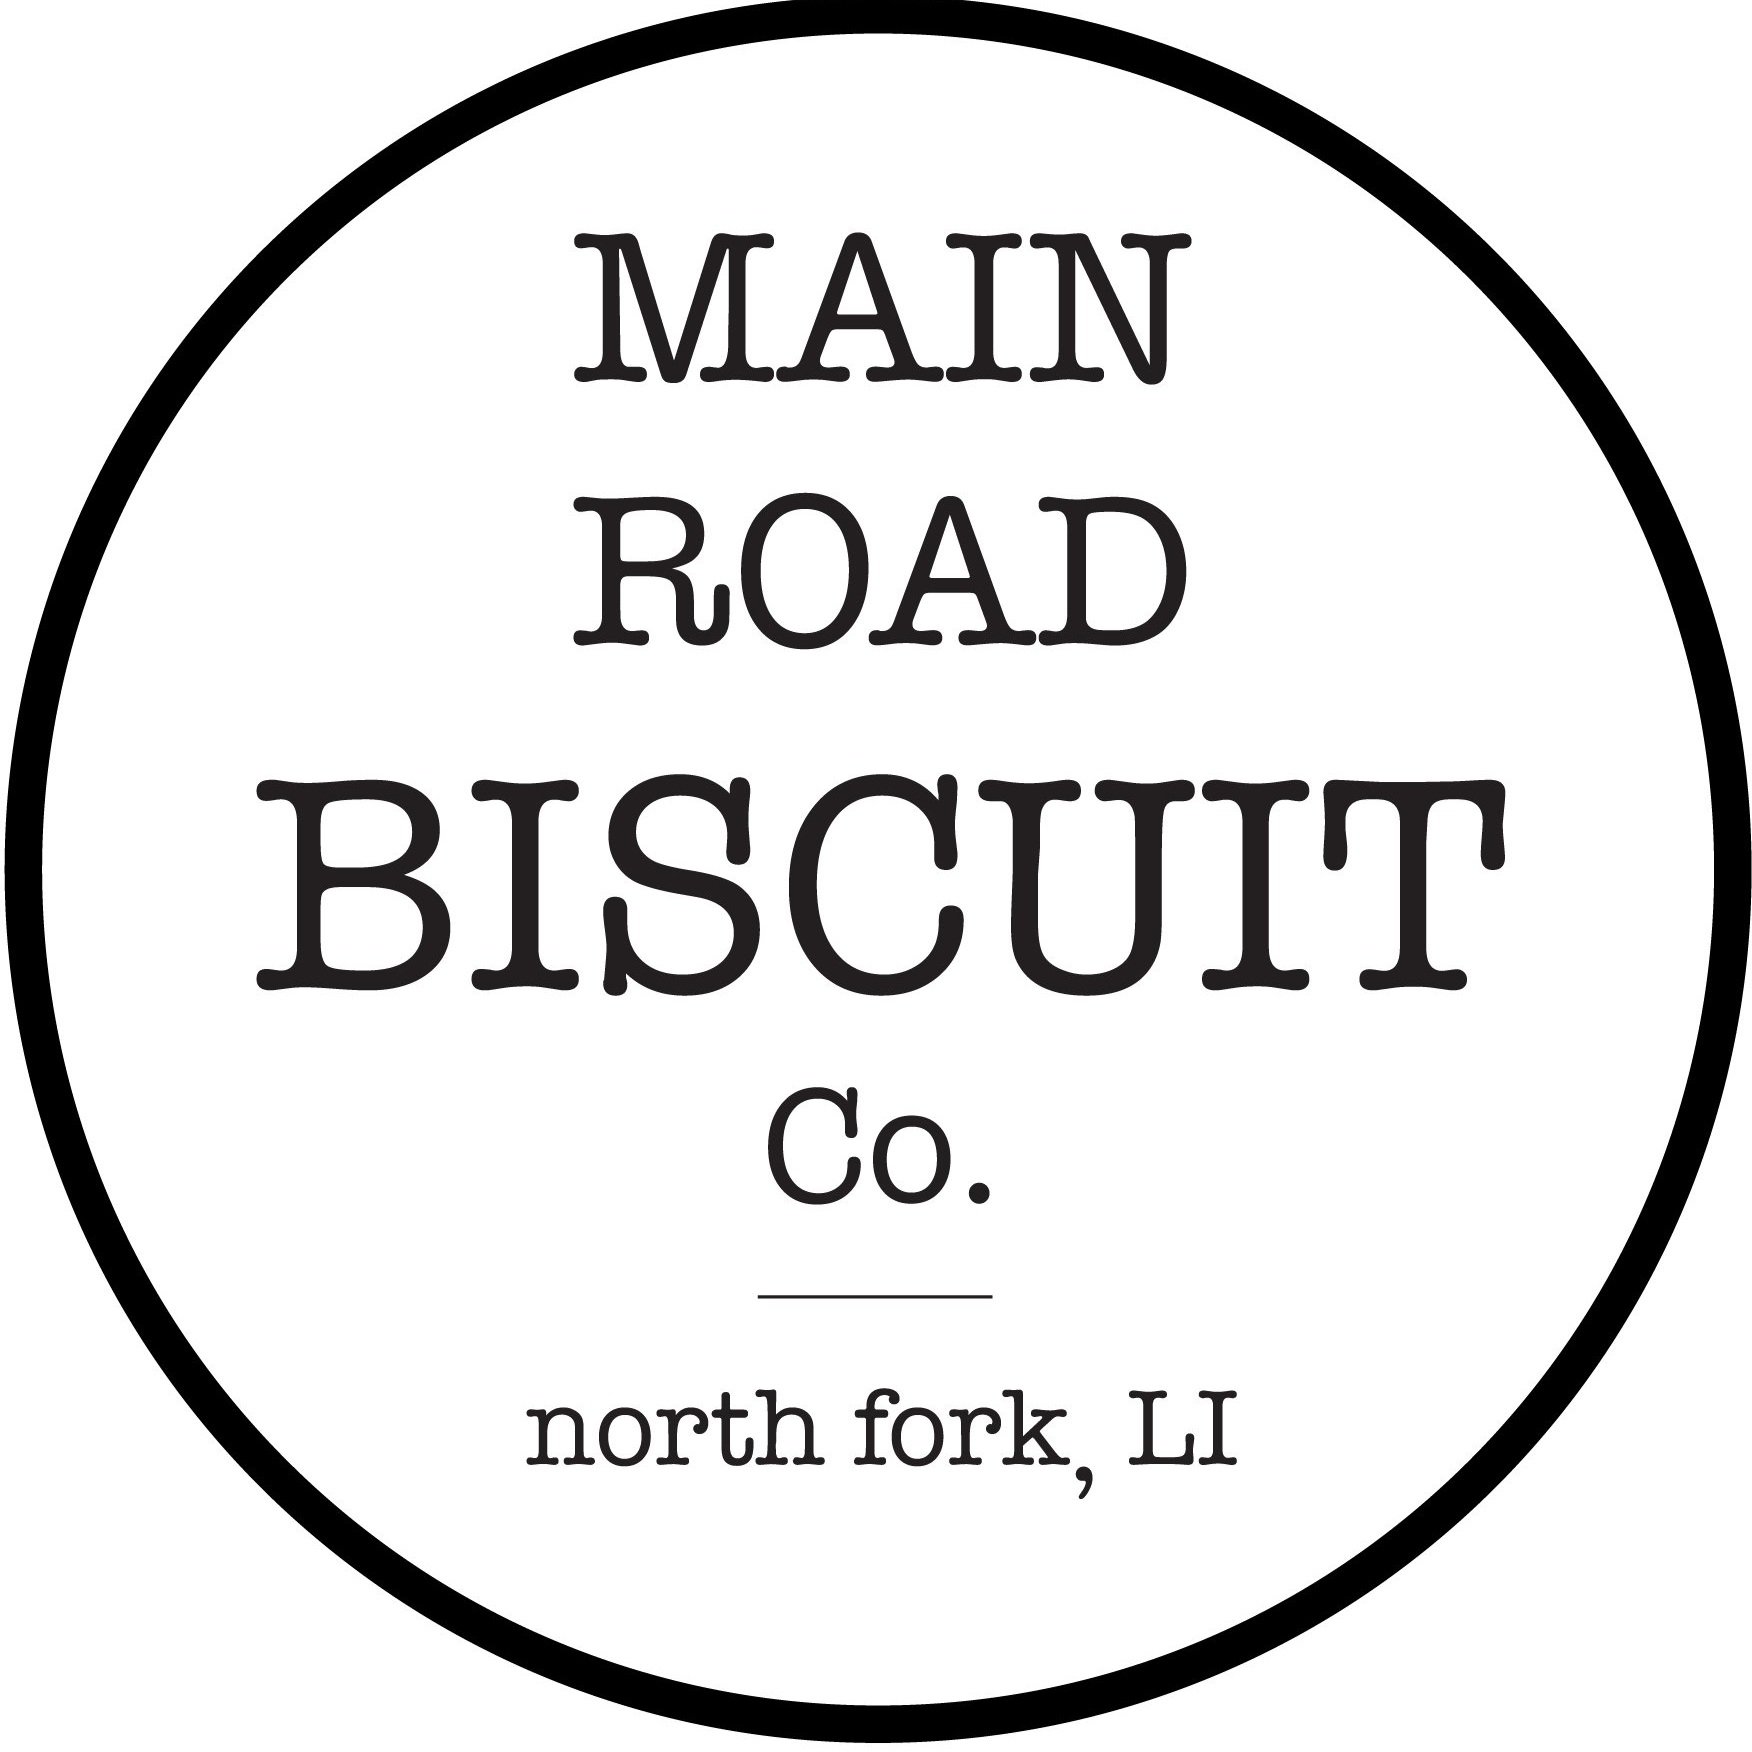 Main Road Biscuit Co.